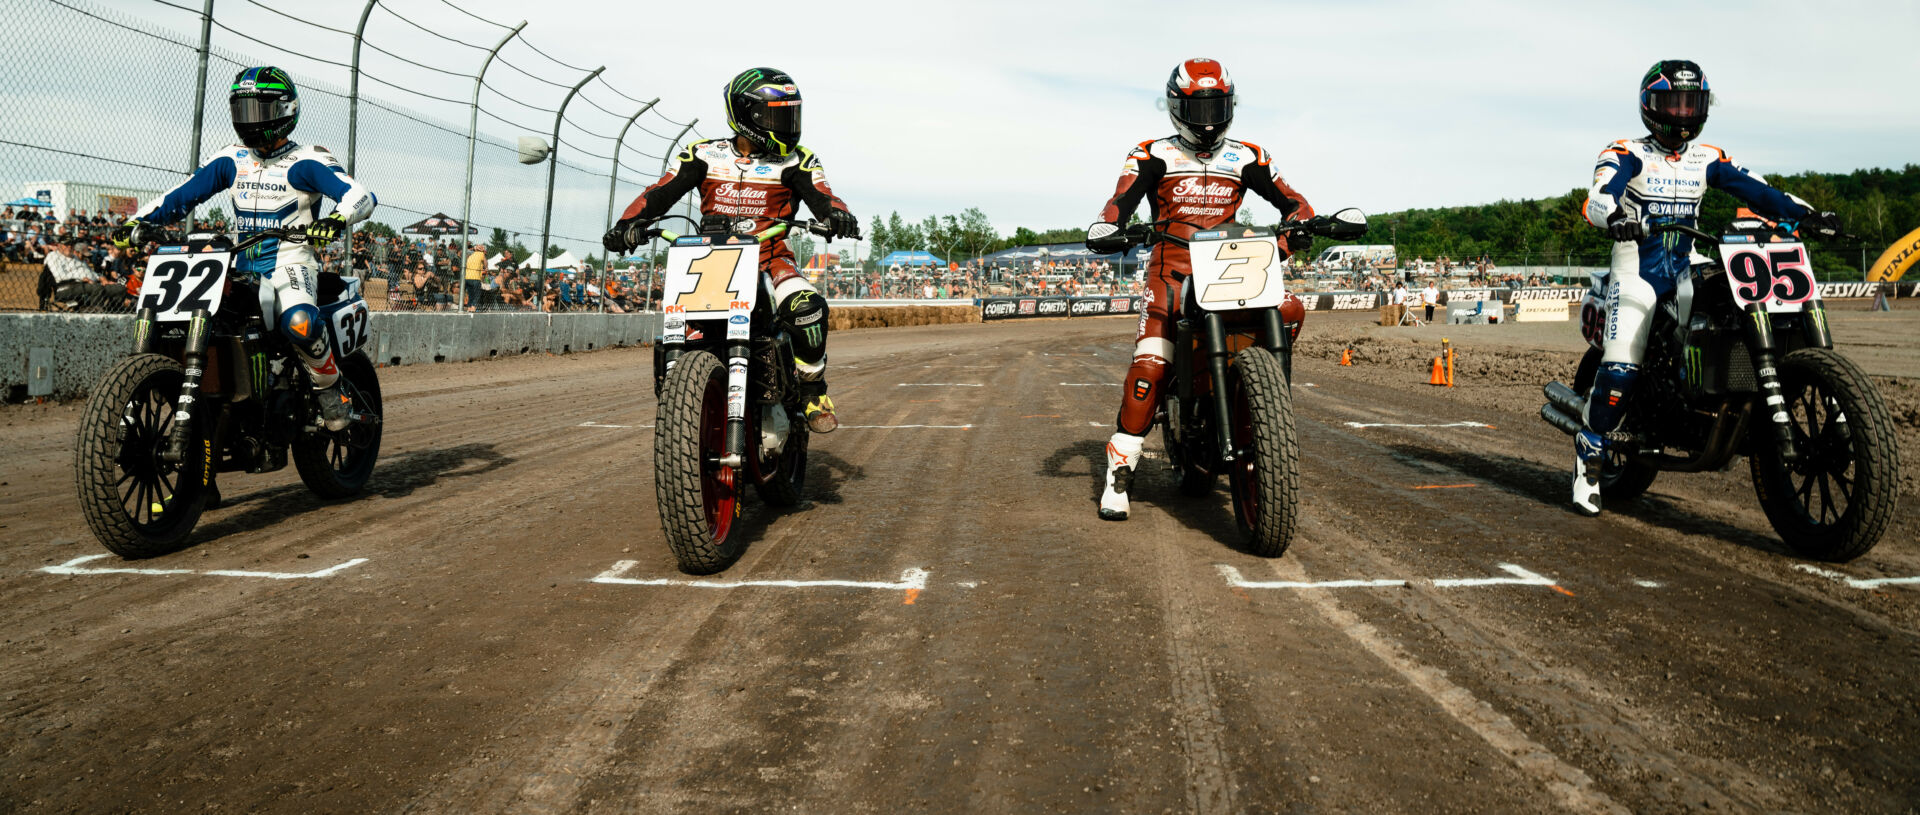 Dallas Daniels (32), Jared Mees (1), Briar Bauman (3), and JD Beach (95) are separated by just 22 points atop the Progressive American Flat Track (AFT) Mission SuperTwins Presented by S&S Cycle Championship standings heading into the season-finale doubleheader in Florida. Photo courtesy AFT.